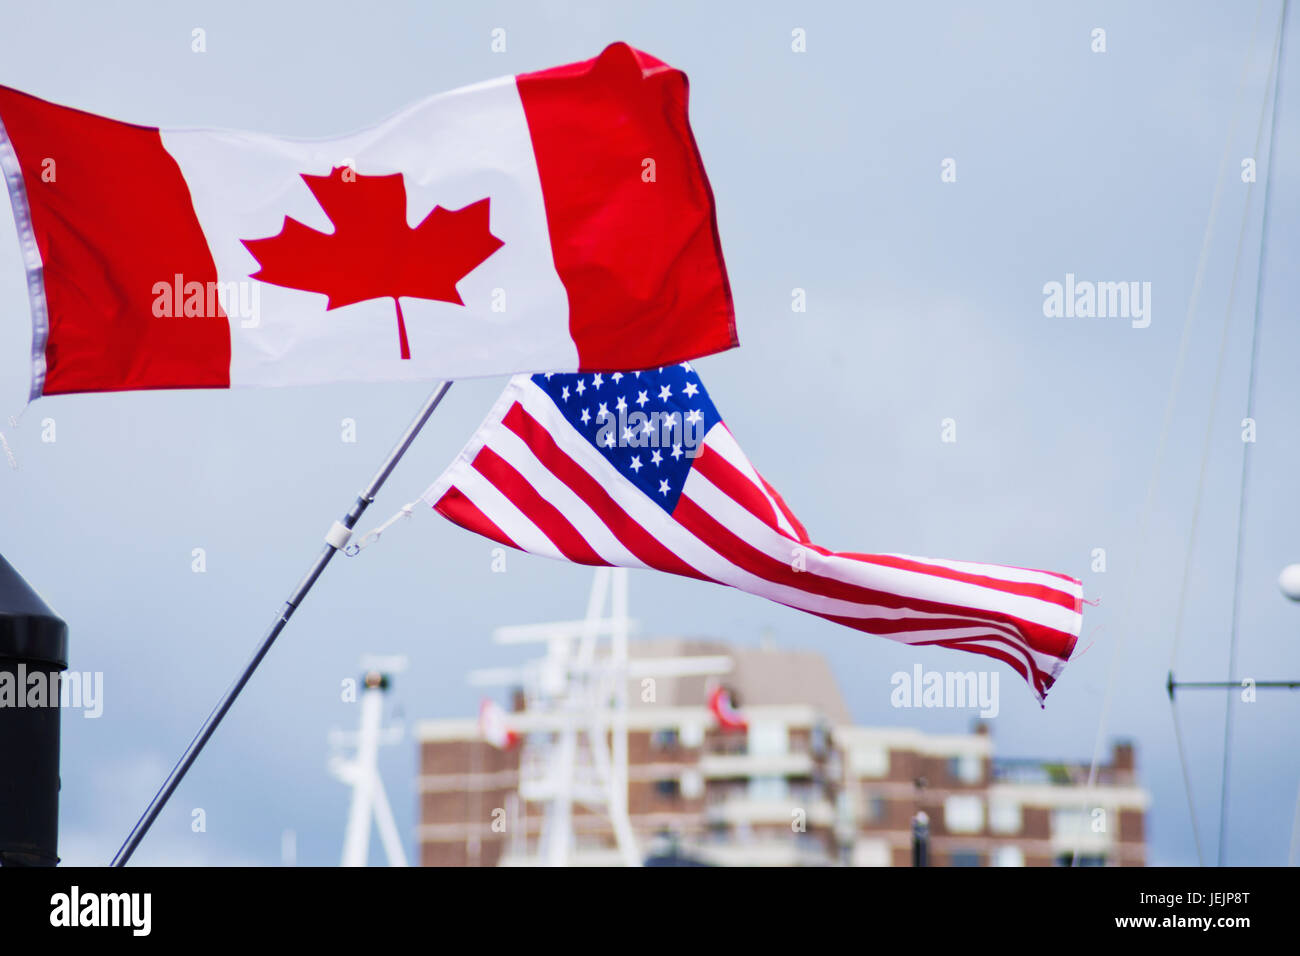 Flags of Canada Canadian and USA American blowing in wind Stock Photo